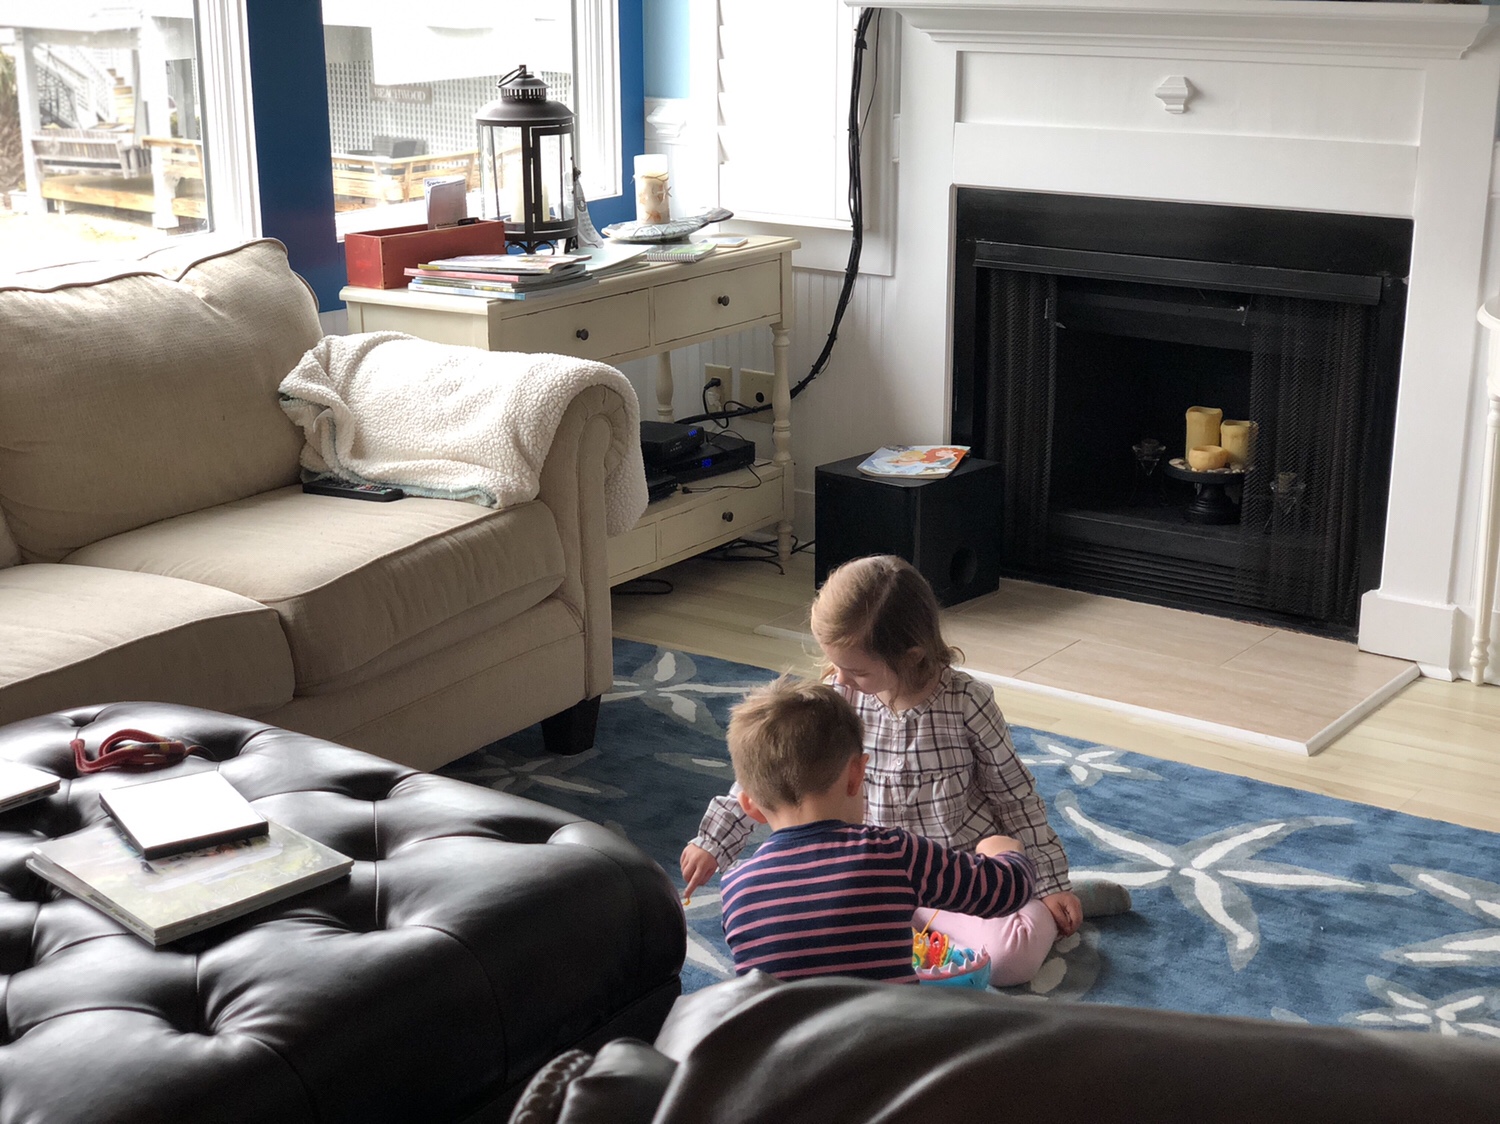 Bald Head Island Family Vacation Best Vacation Rental House - Why we love this east coast treasure and our favorite beach house on HomeAway via Misty Nelson, mom blogger, family travel blog review of NC vacation destinations 